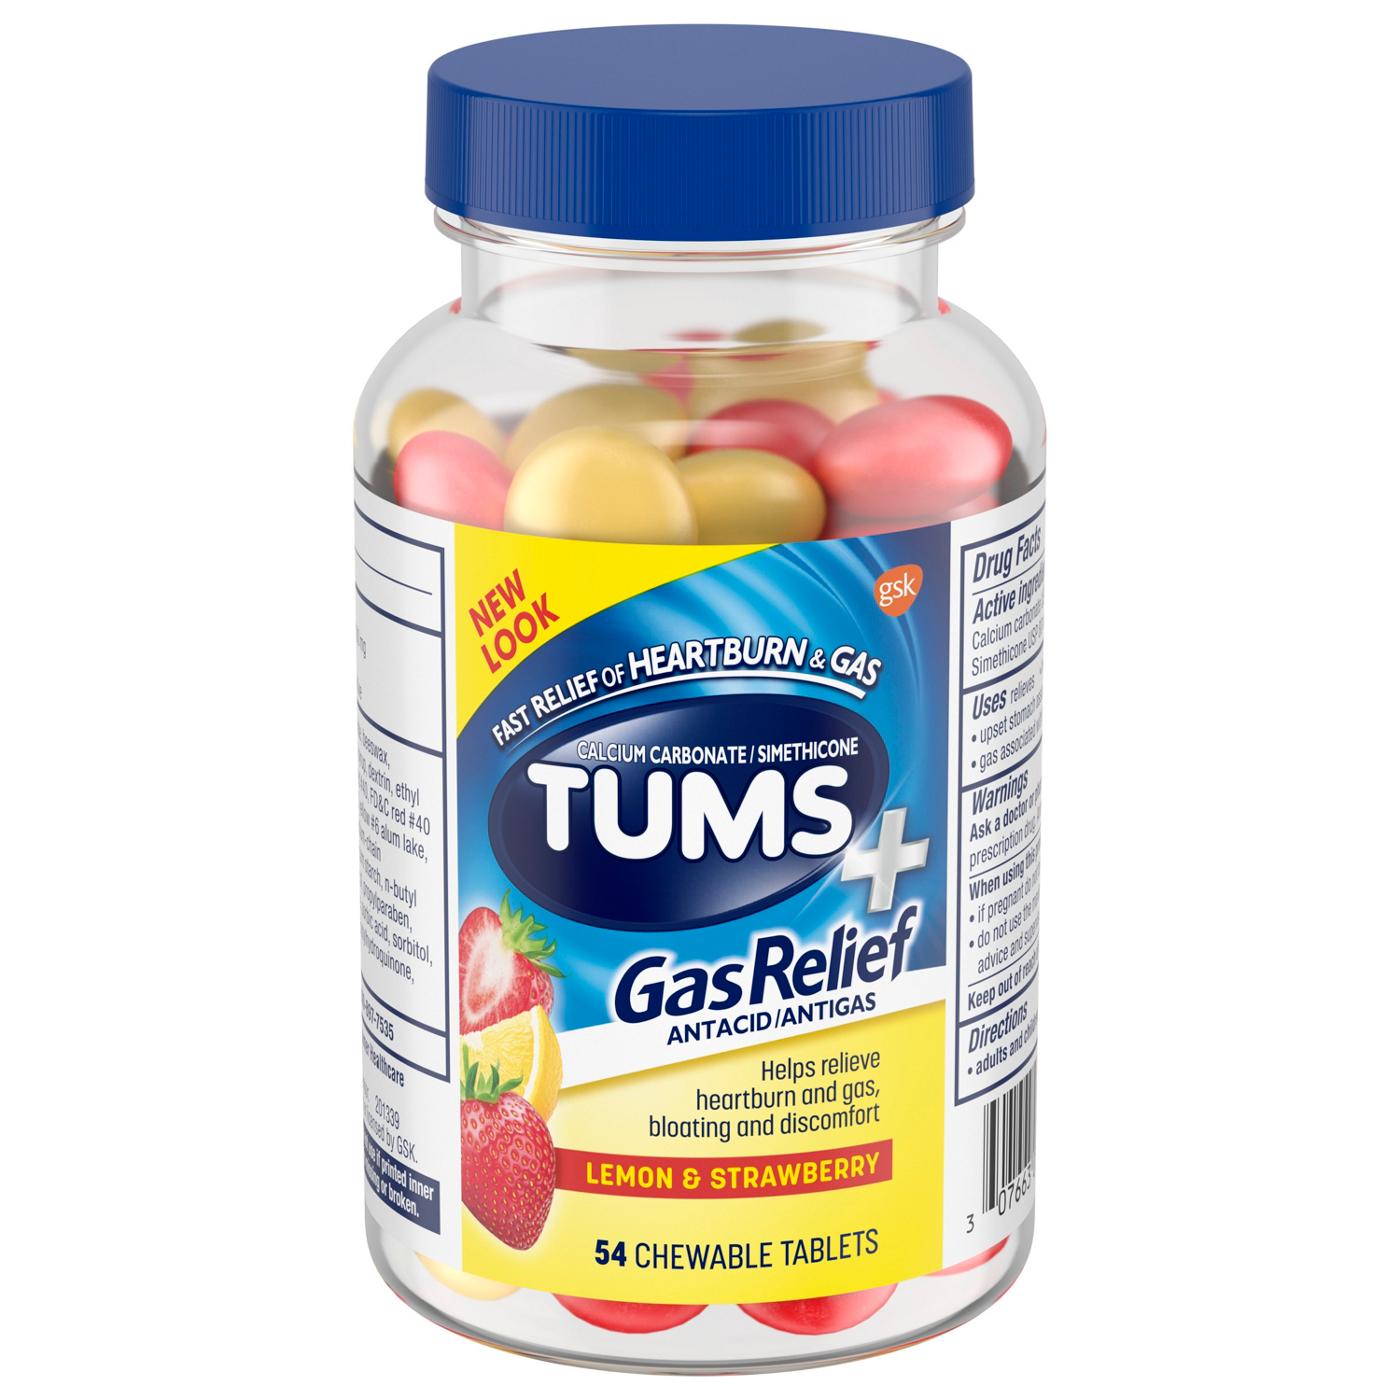 Tums Plus Gas Relief Chewable Tablets - Lemon & Strawberry; image 1 of 2